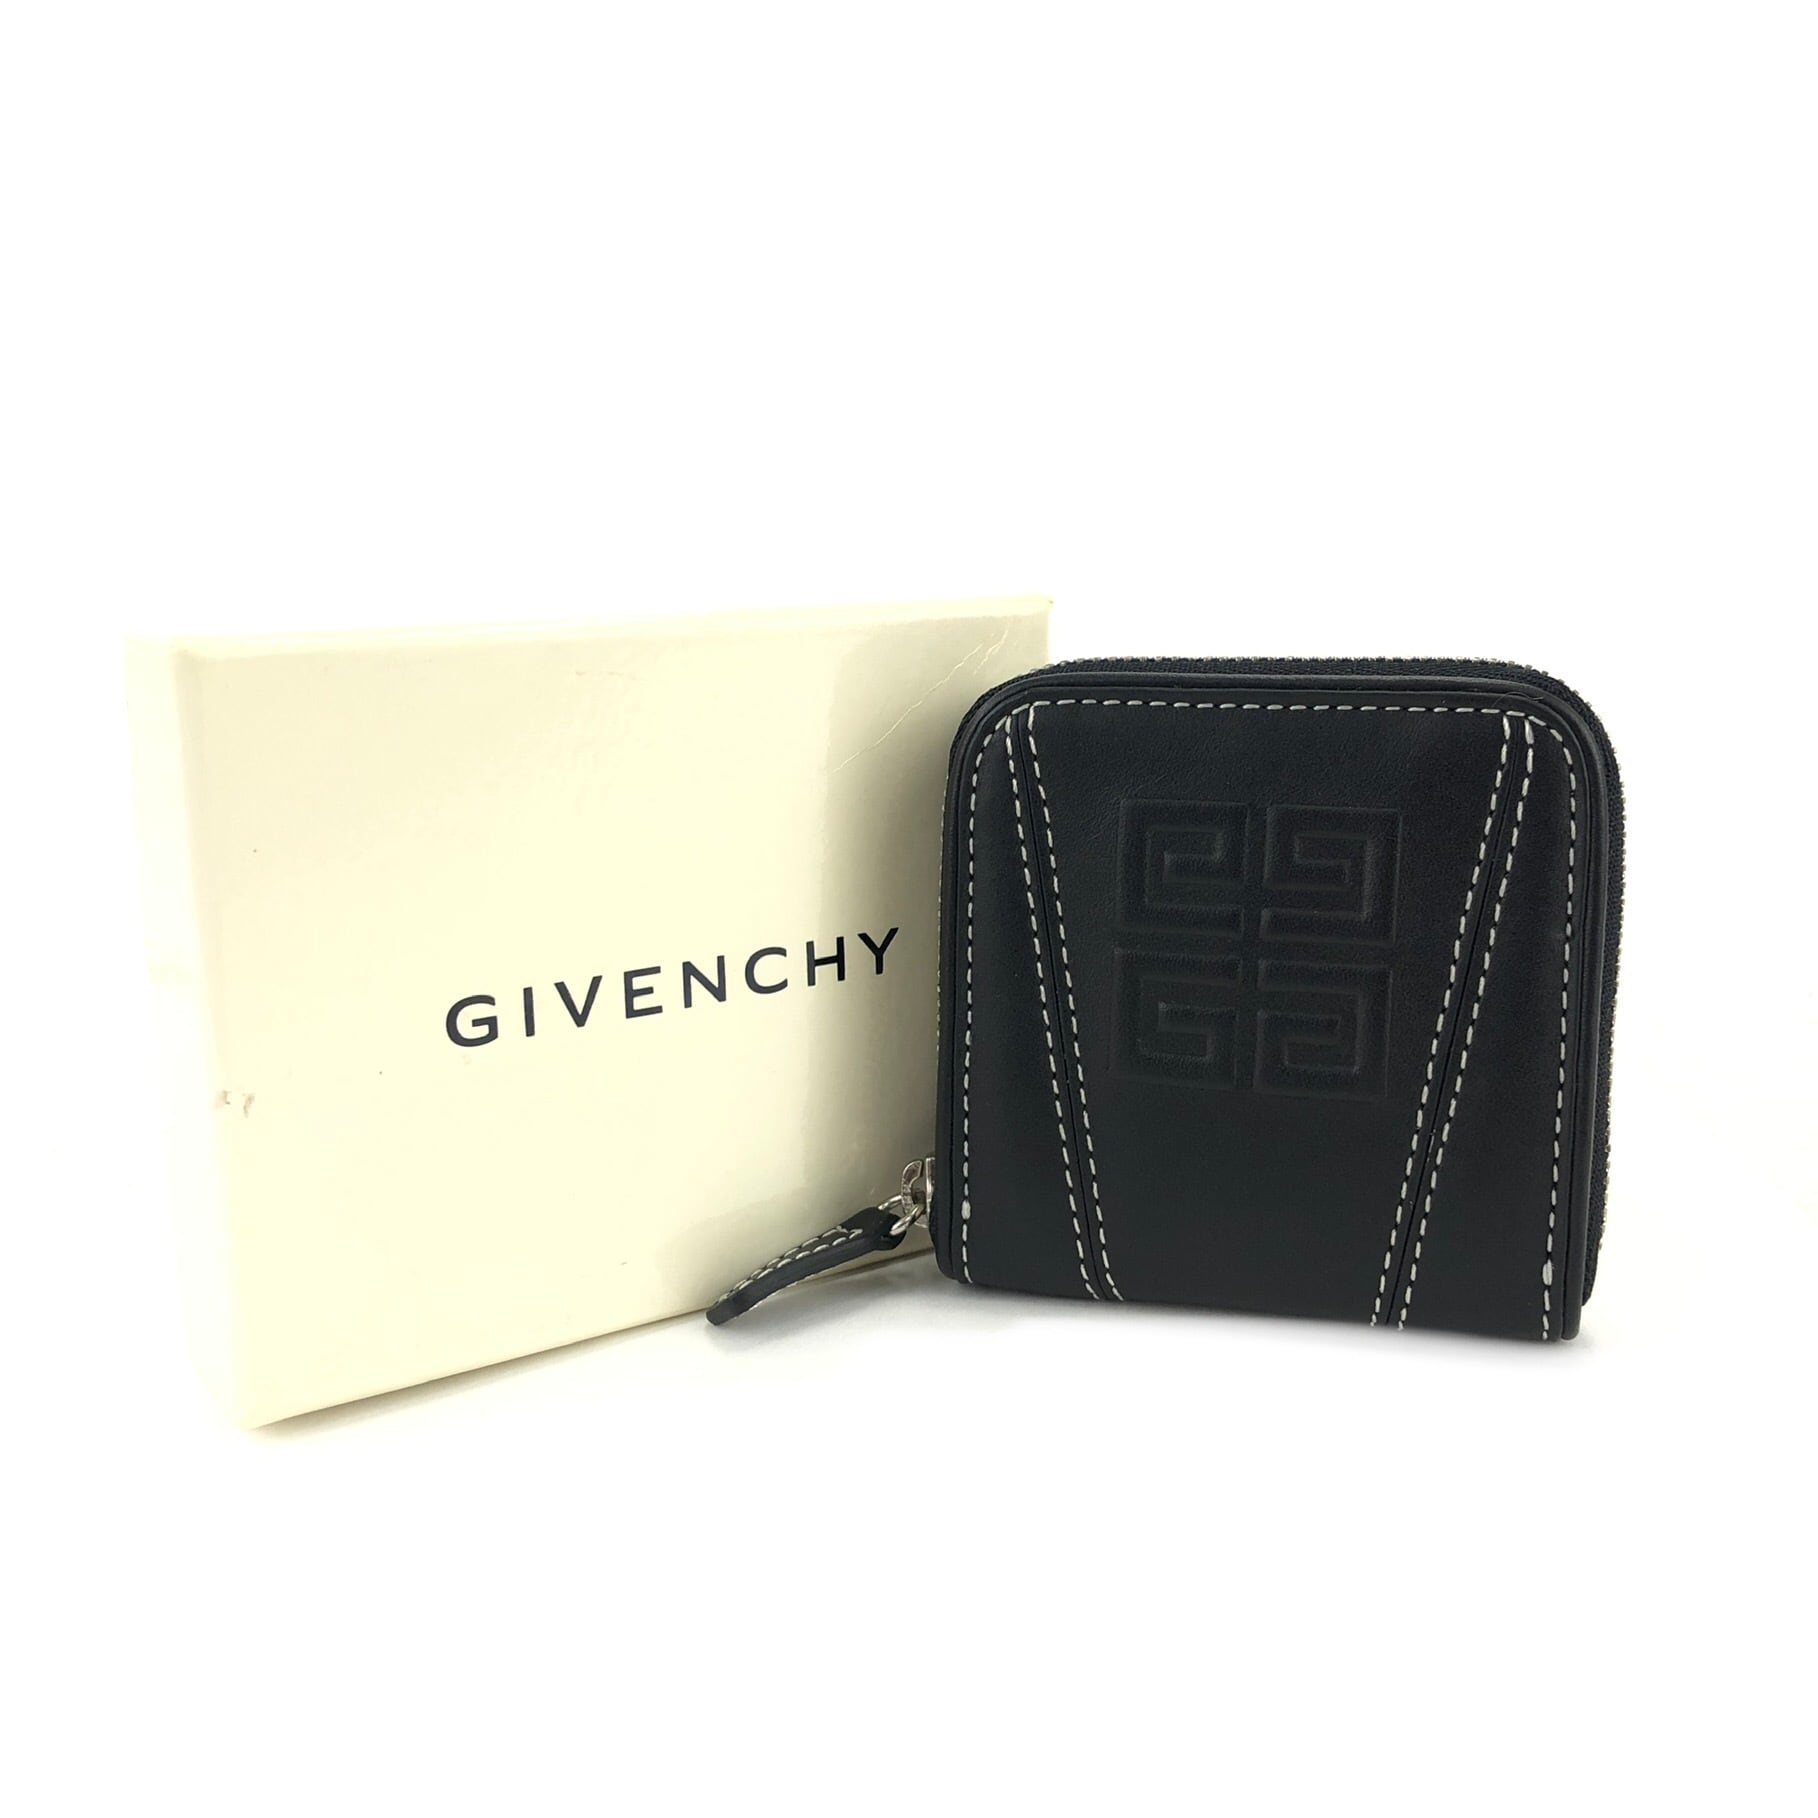 GIVENCHY ジバンシィ　ロゴ　ステッチ　レザー　コンパクトウォレット　ミニ　コインケース　財布　ブラック　vintage　ヴィンテージ　オールド　 6dukrg | VintageShop solo powered by BASE